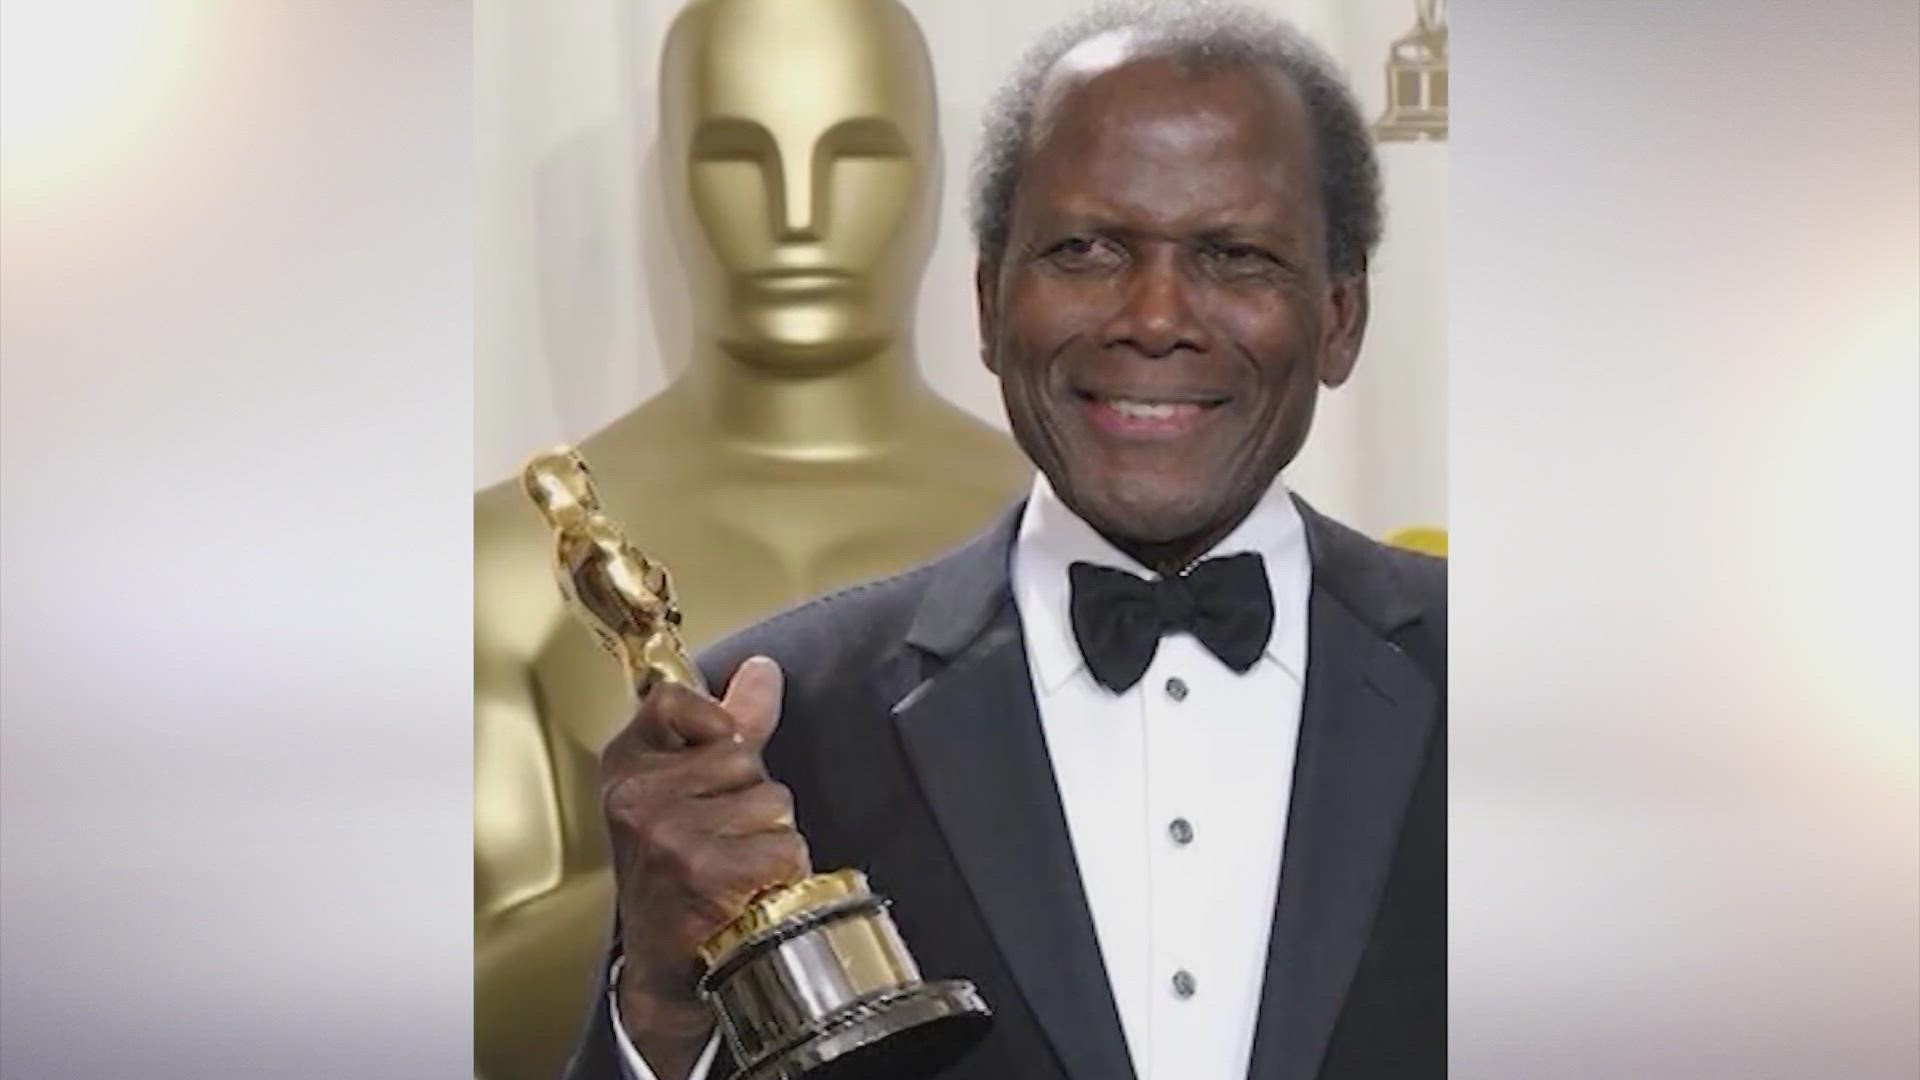 The legendary actor who made history as the first Black actor to win the Oscar for best lead performance, has died at the age of 94.